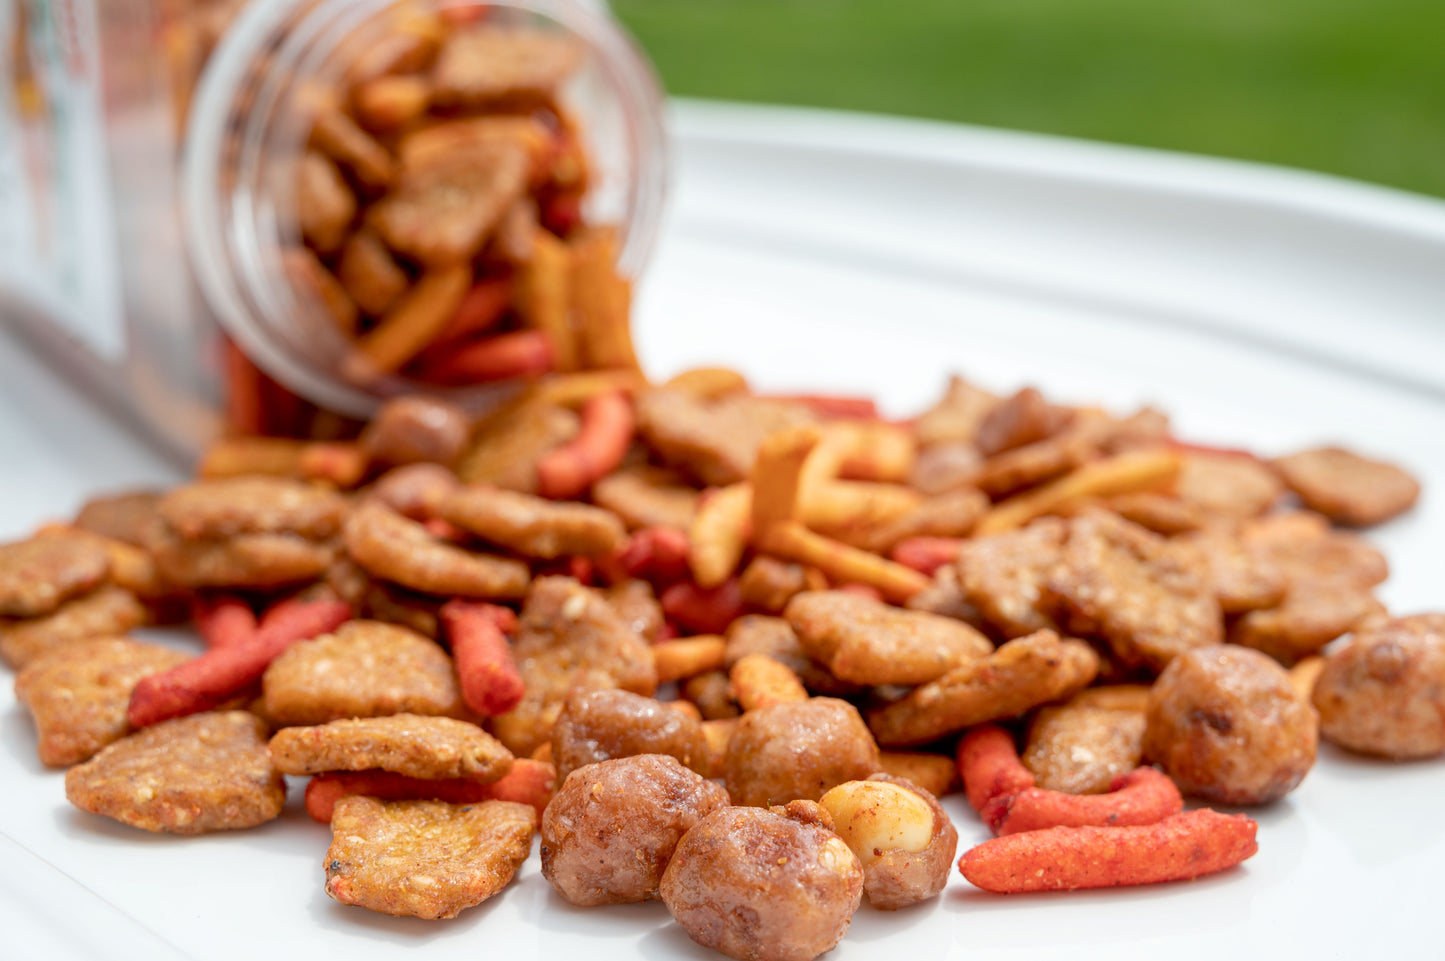 Spicy Trail Mix